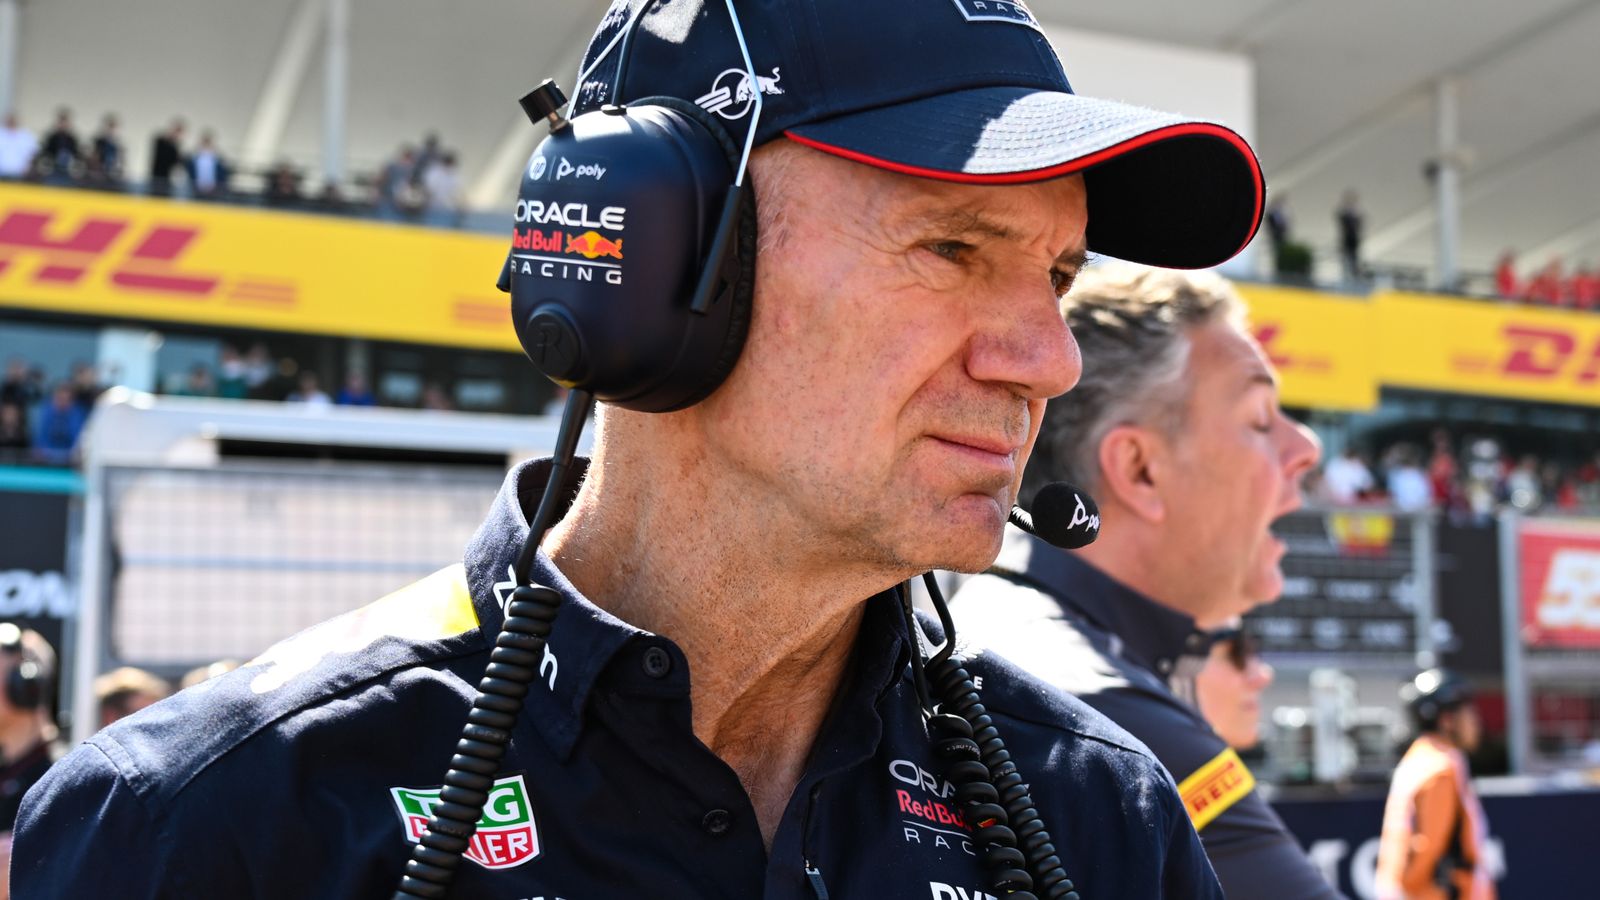 Adrian Newey, F1's serial title-winning designer, decides to leave Red Bull after nearly two decades | F1 News | Sky Sports